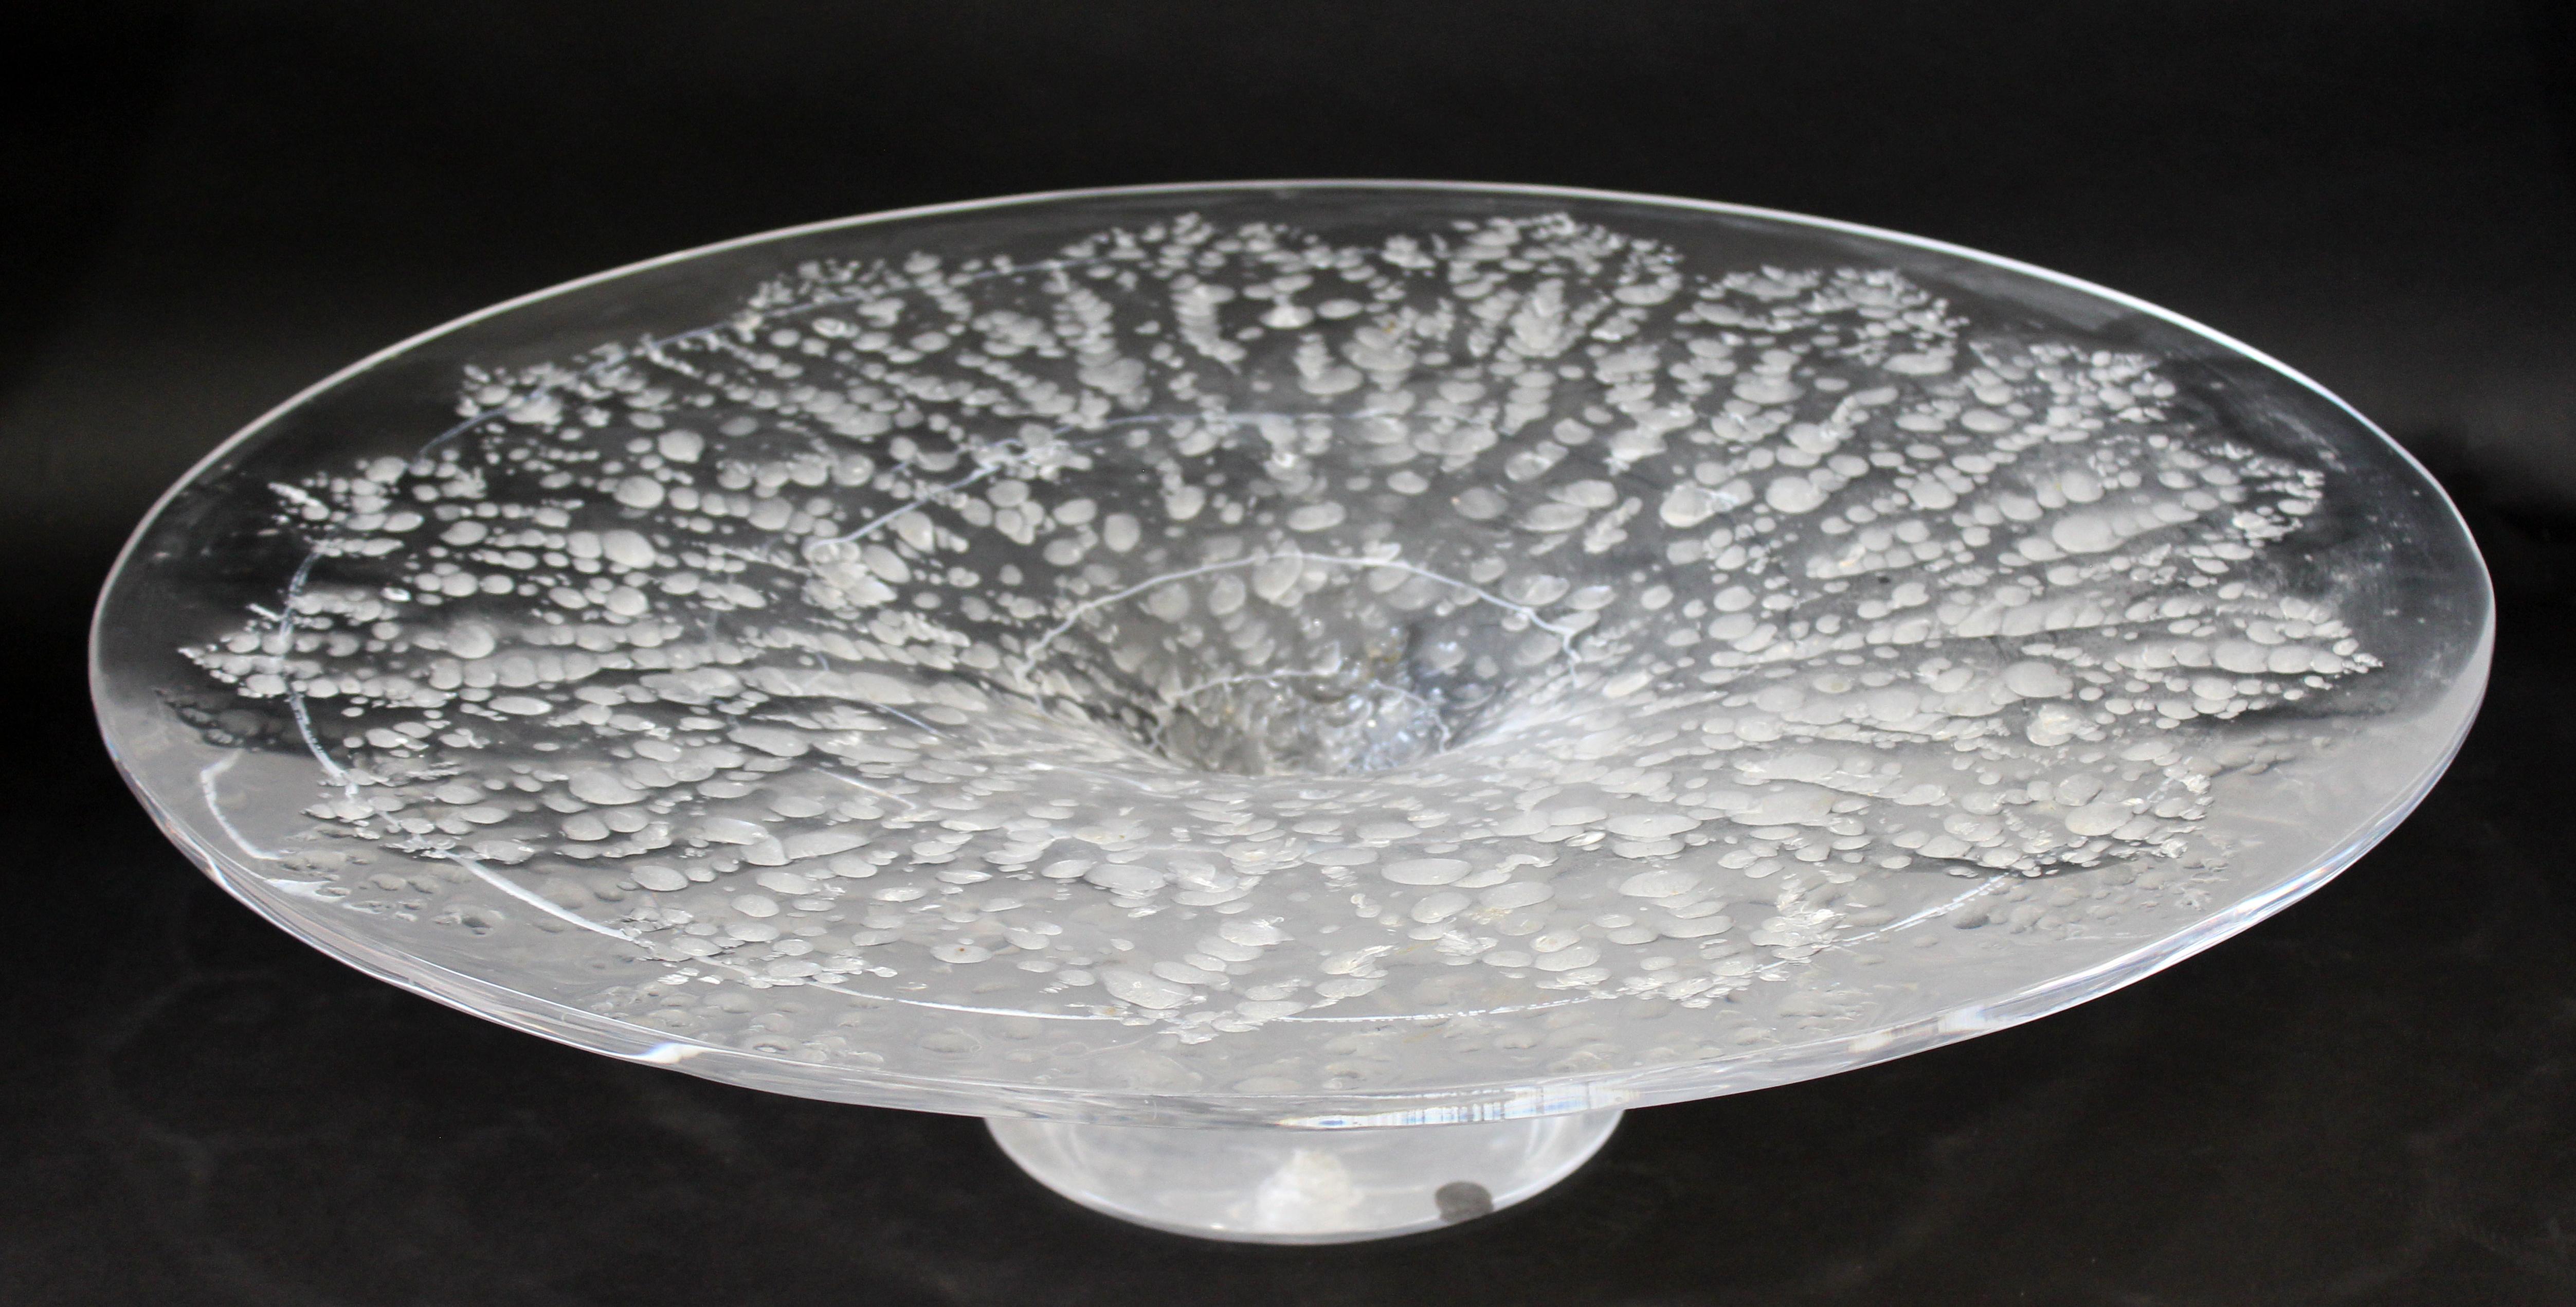 For your consideration is a charming, Lucite acrylic pedestal bowl table sculpture, signed by Tery Belle, dated 1993. In excellent condition. The dimensions are 28.5